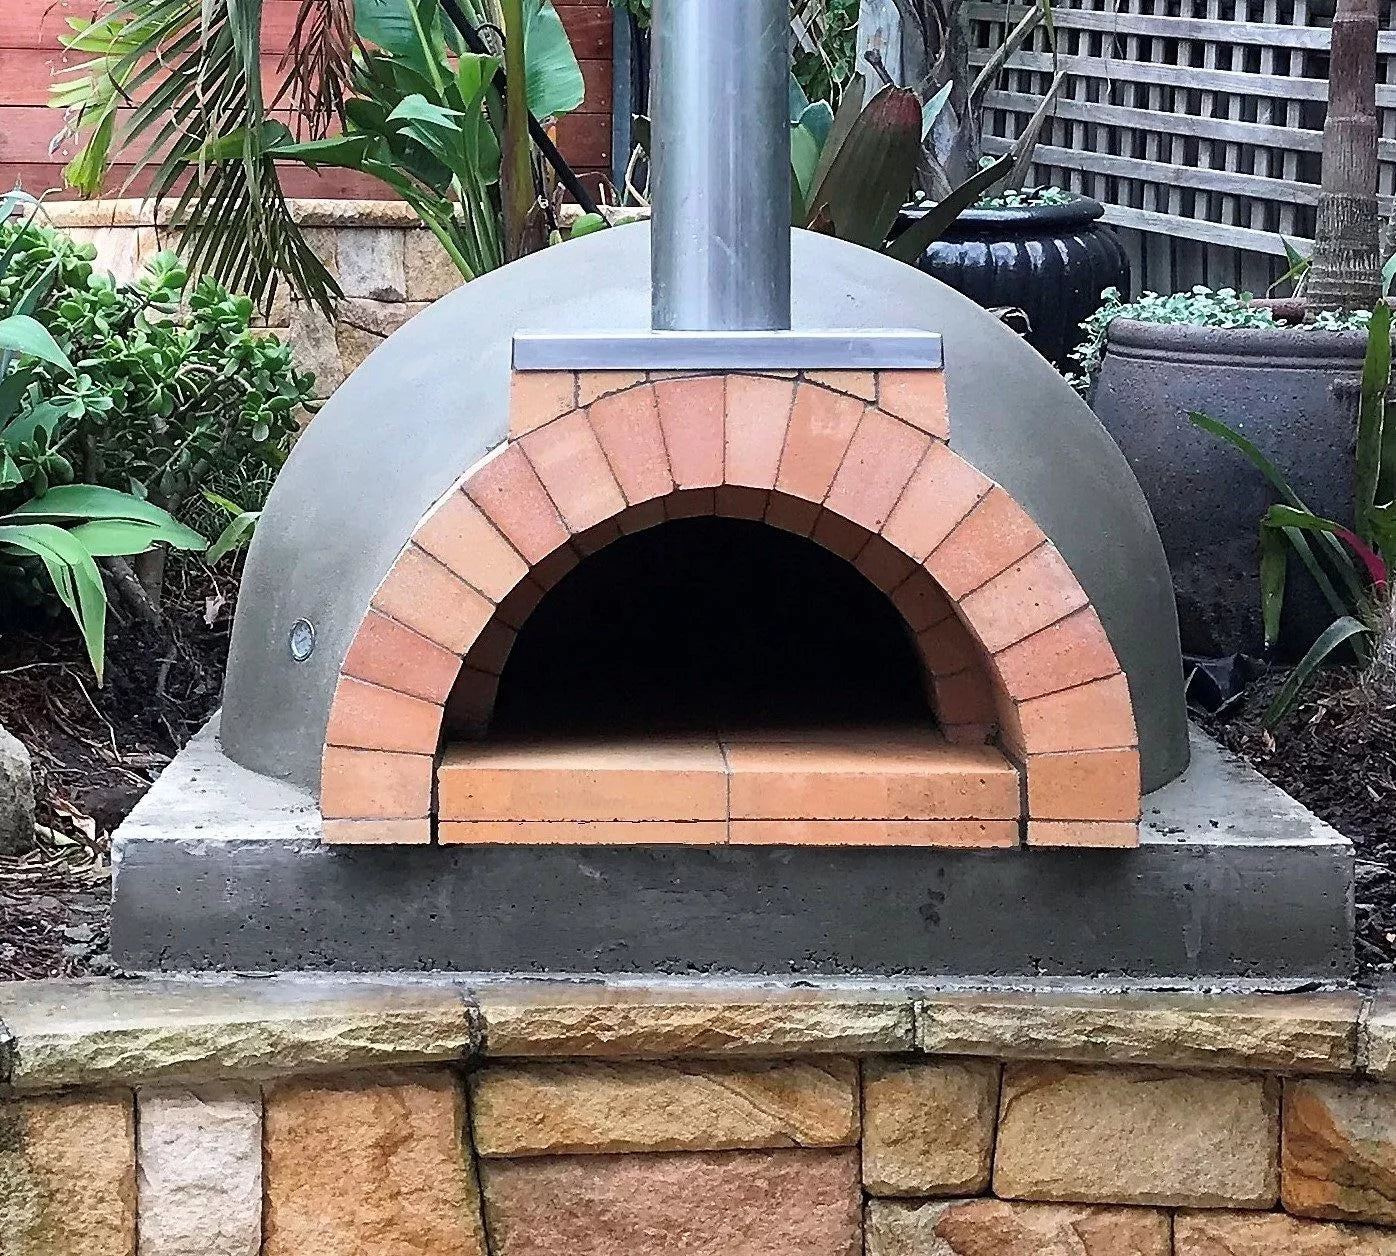 850 PRECUT Brick dome oven kit - The Woodfired Co.